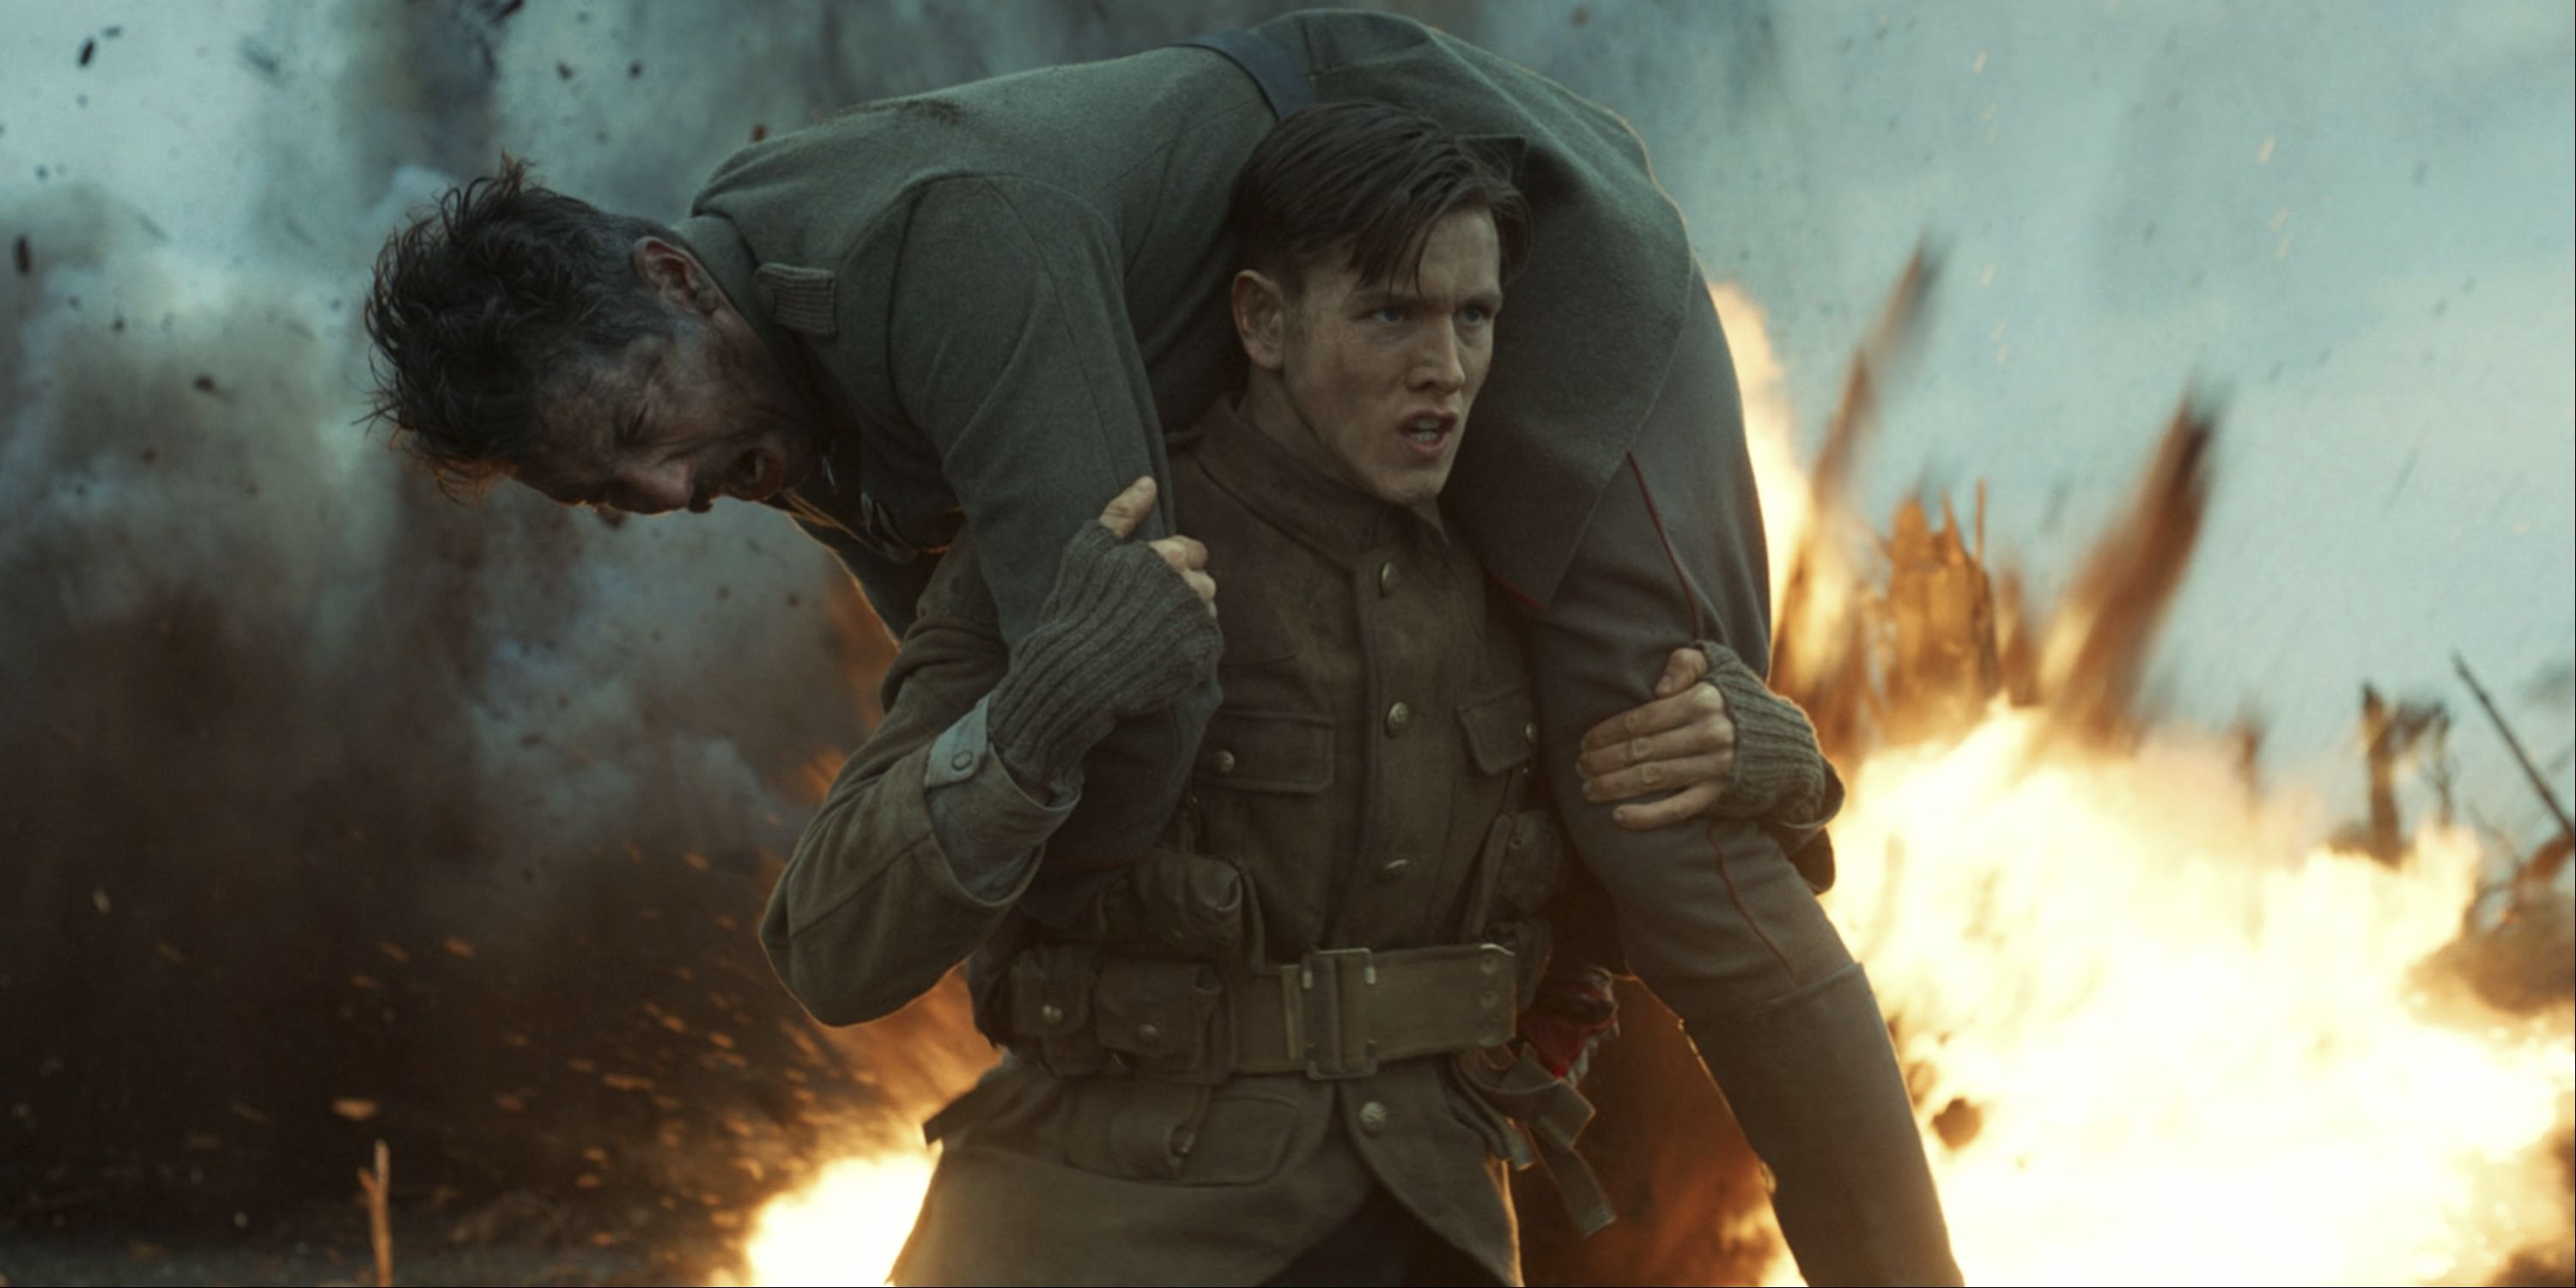 Conrad Oxford carrying a soldier on the battlefield in The King's Man